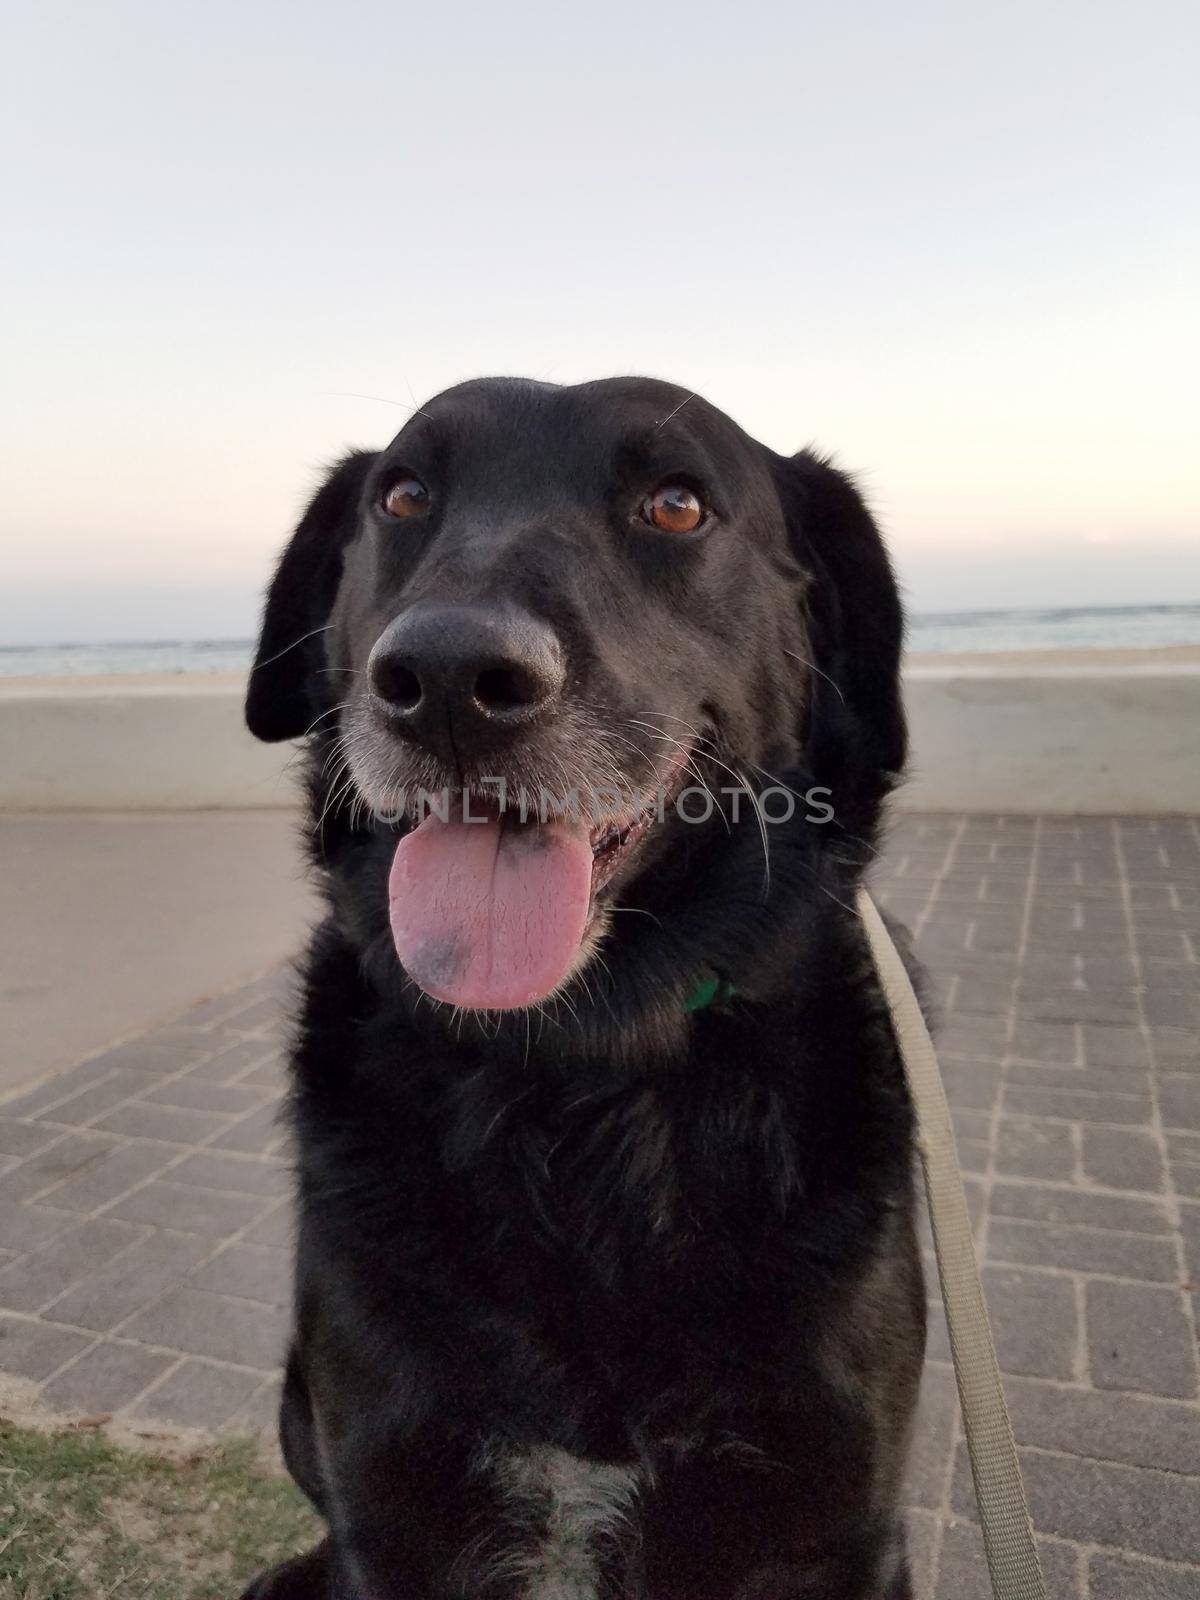 Black retriever Dog wearing a green collar on neck and tongue hanging out on beach by EricGBVD